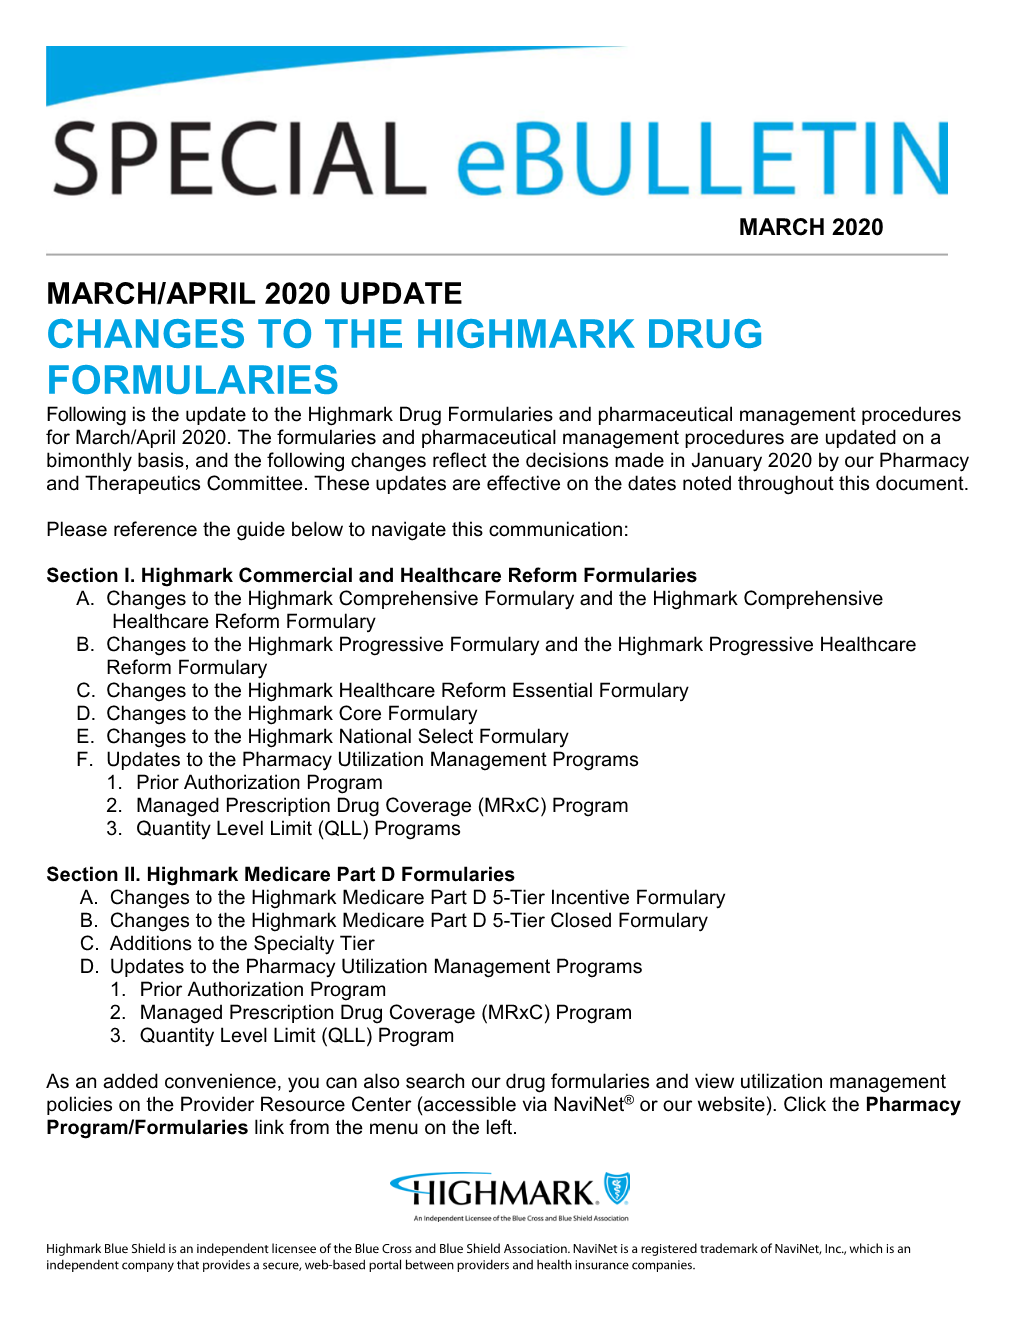 CHANGES to the HIGHMARK DRUG FORMULARIES Following Is the Update to the Highmark Drug Formularies and Pharmaceutical Management Procedures for March/April 2020